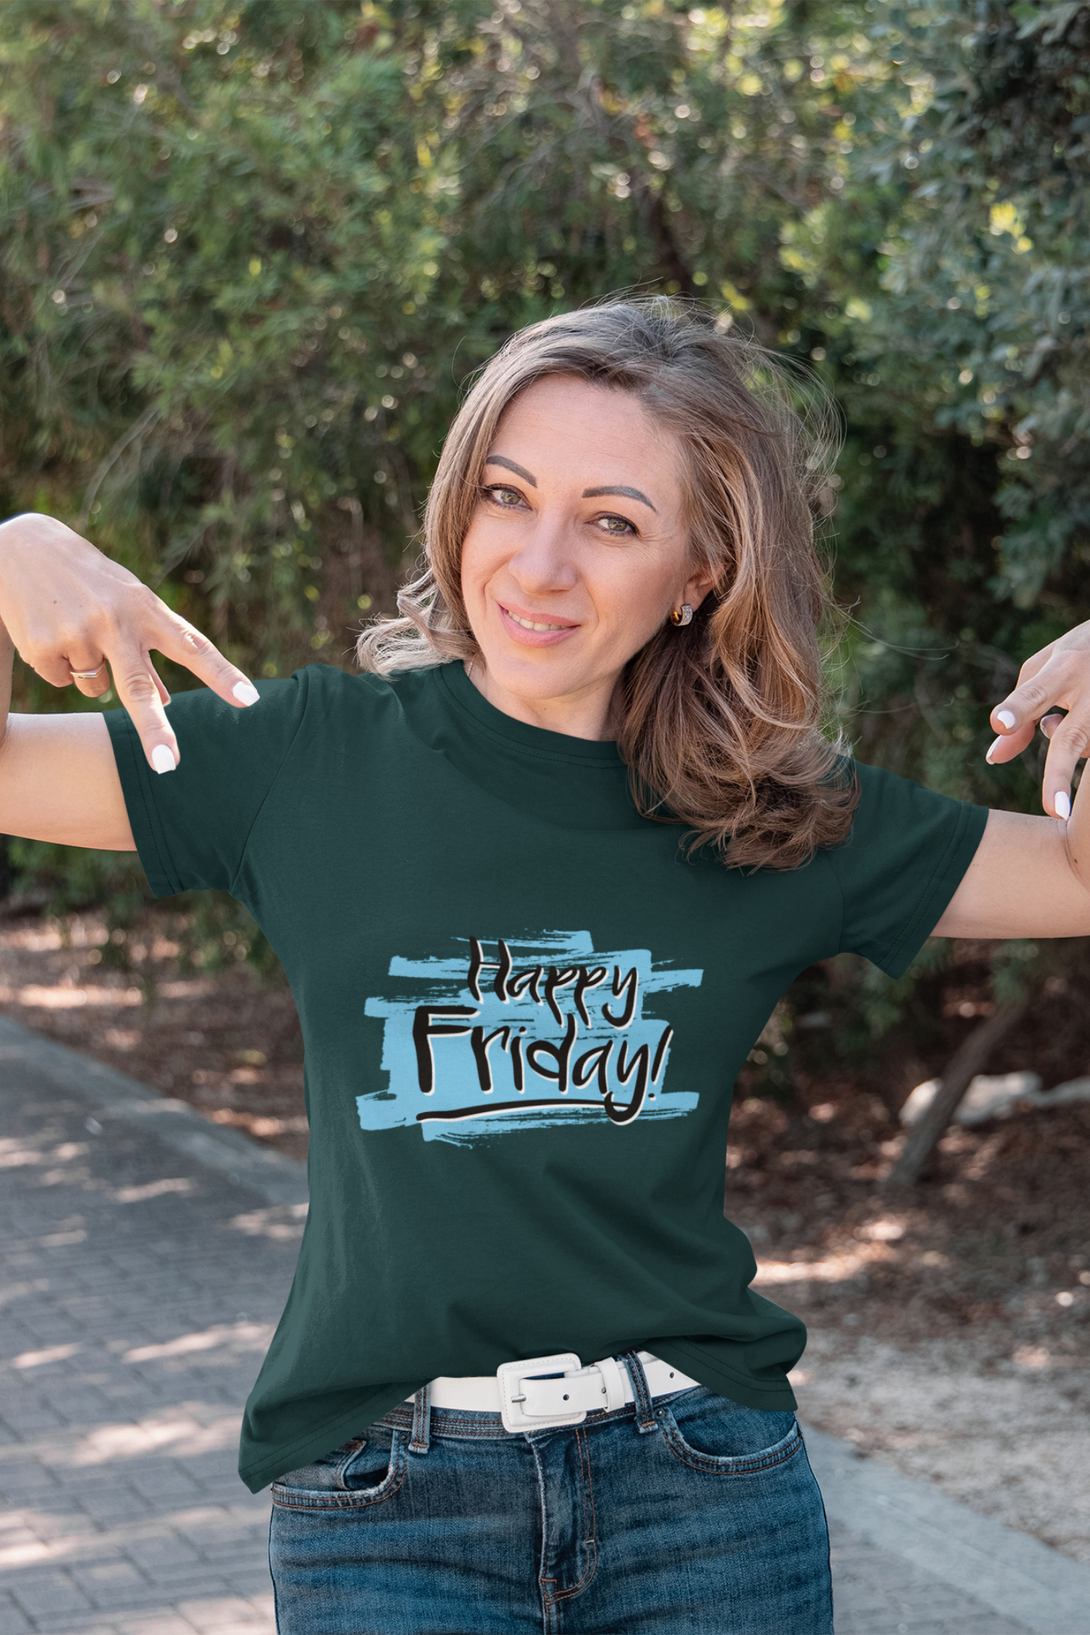 Happy Friday Printed T-Shirt For Women - WowWaves - 2